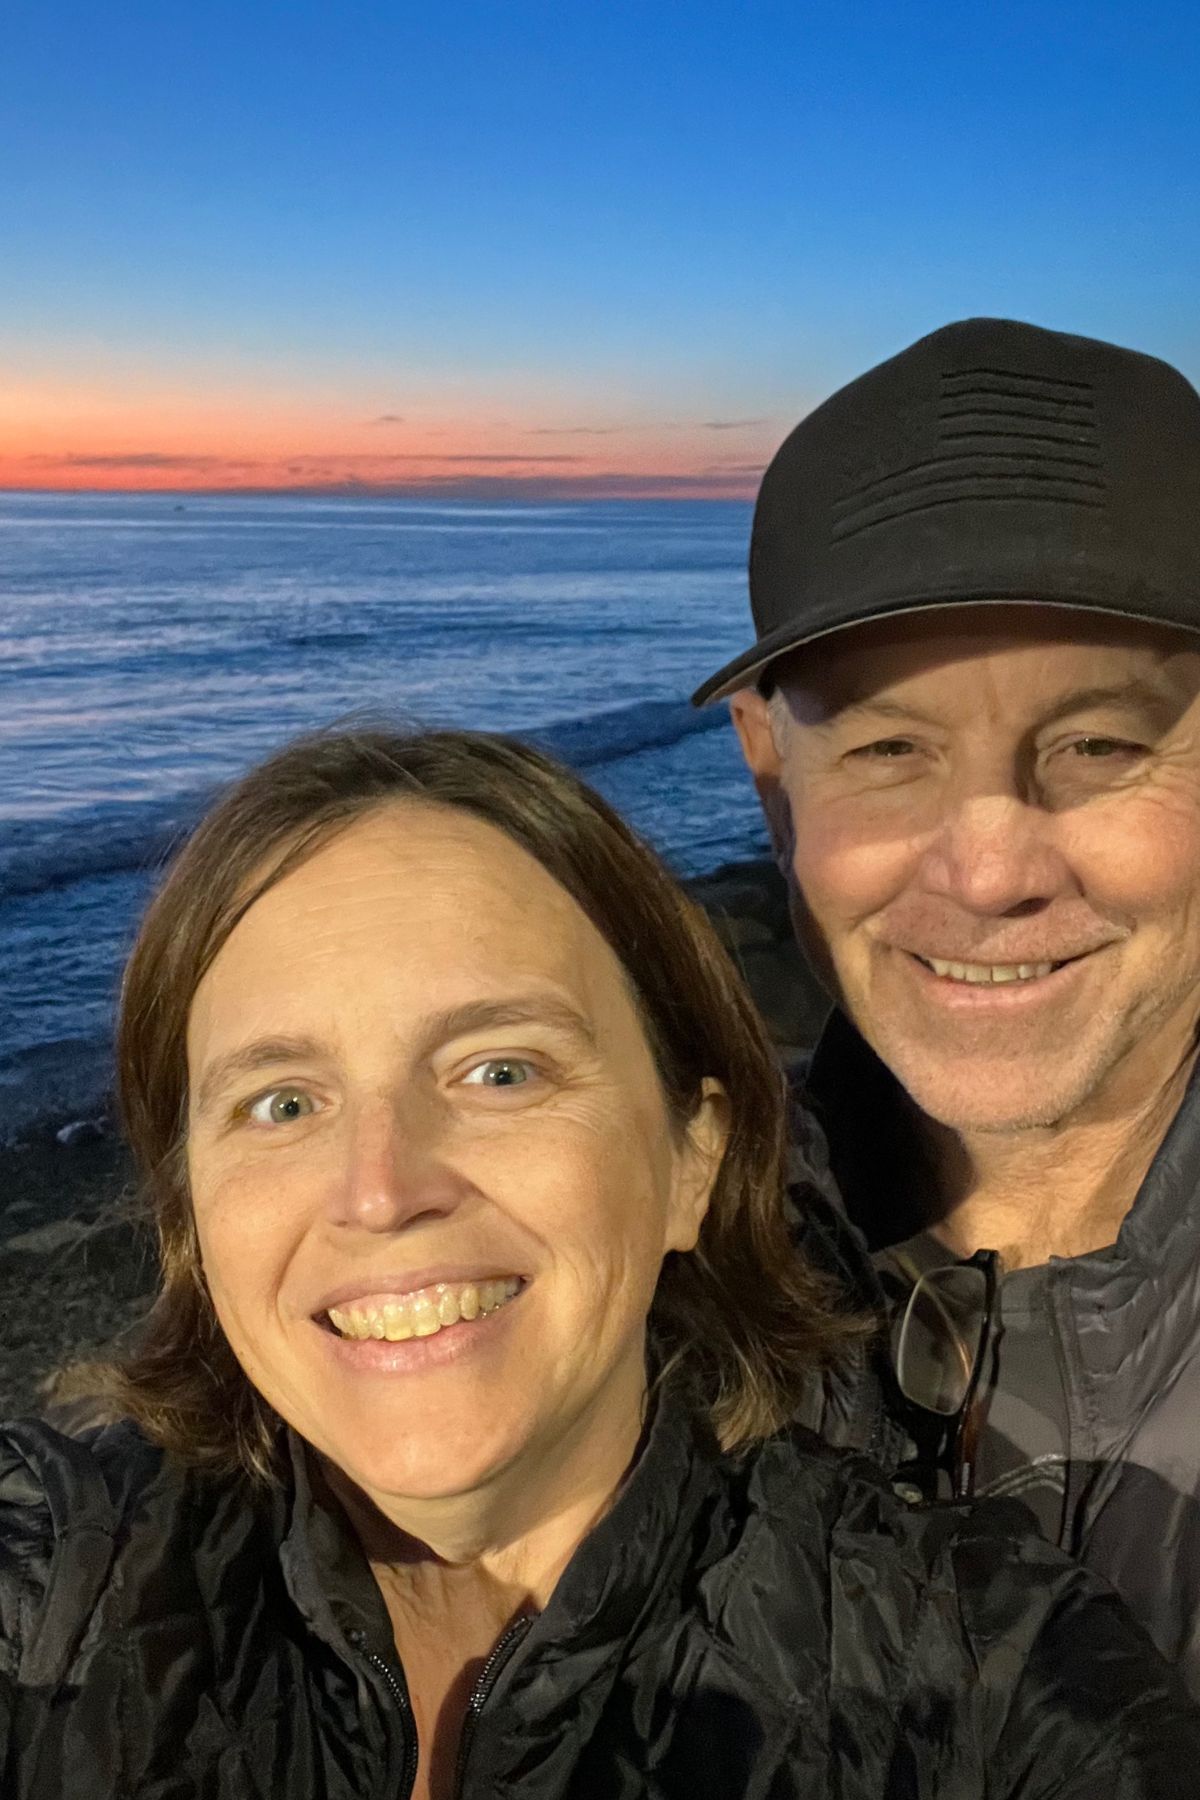 woman and man smiling at camera with ocean sunset in the background.